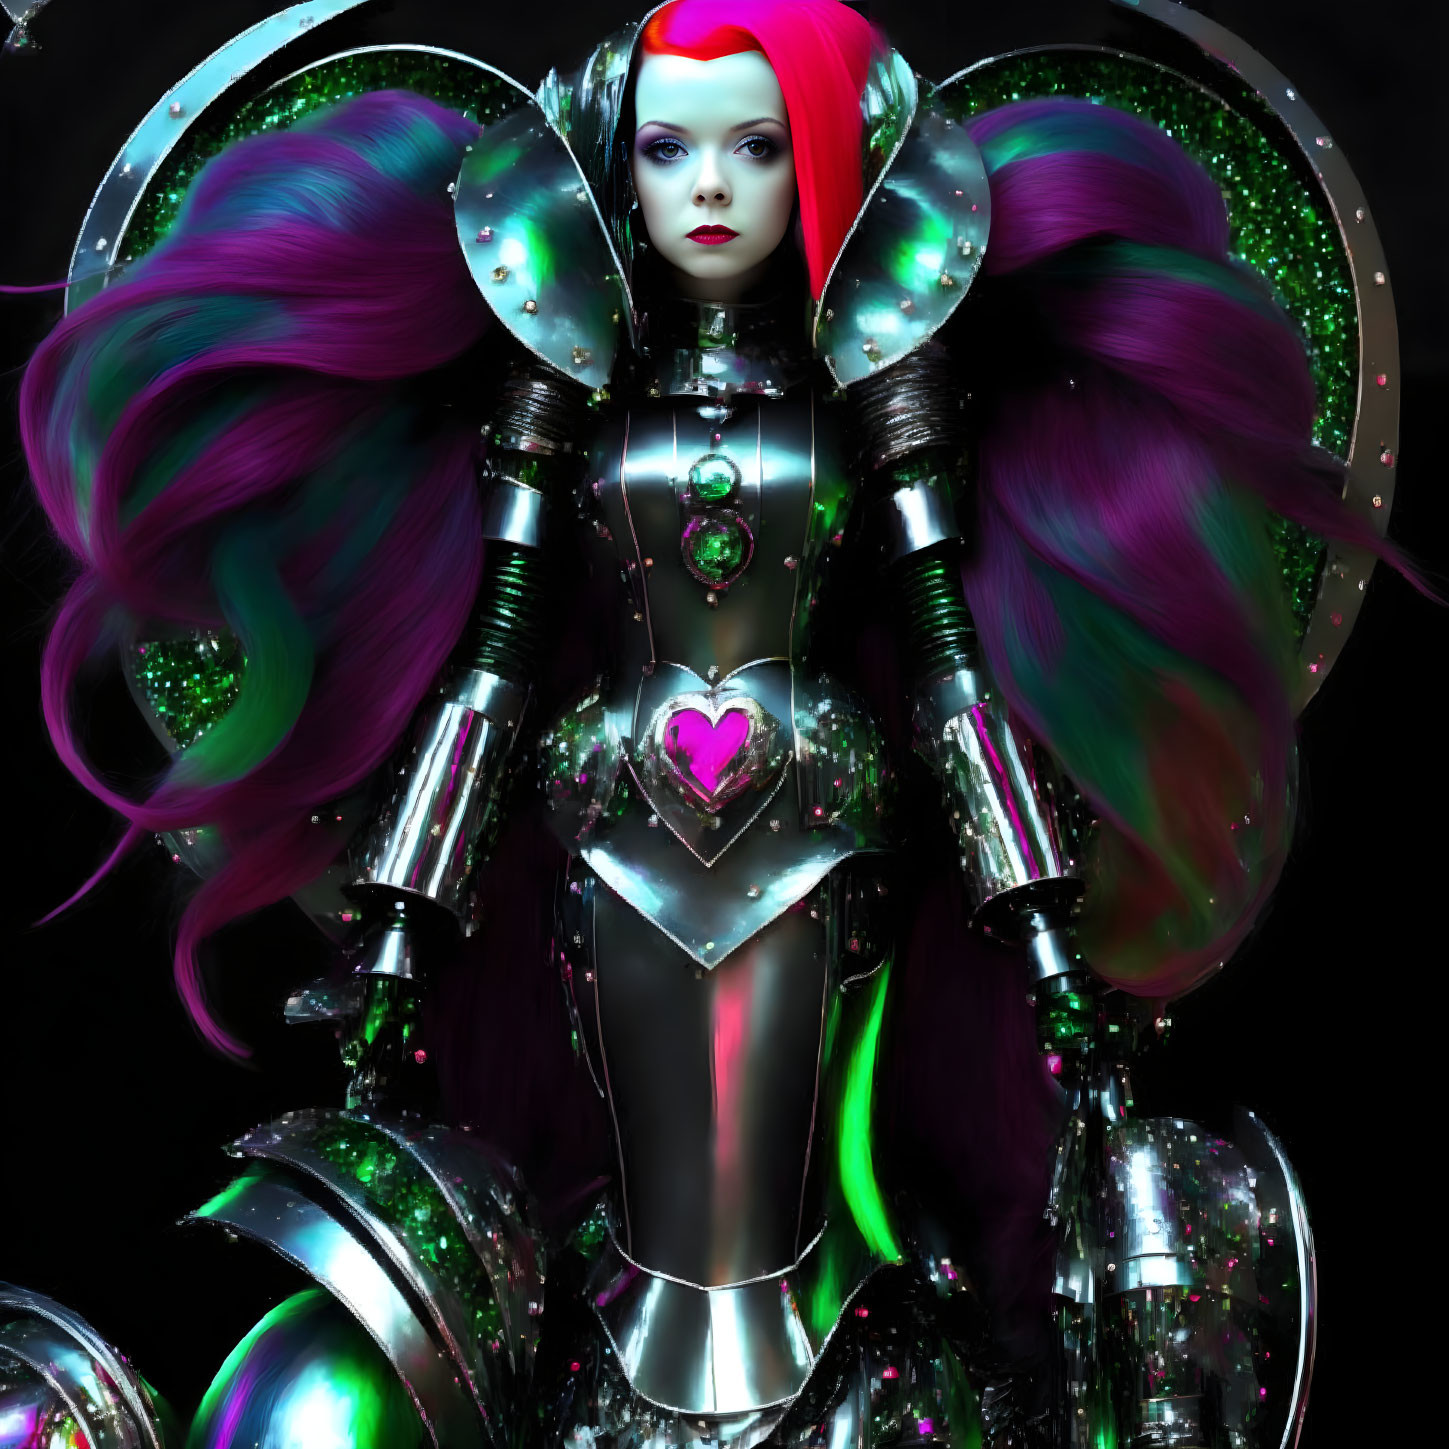 Female Futuristic Robot with Multicolored Hair and Glowing Accents